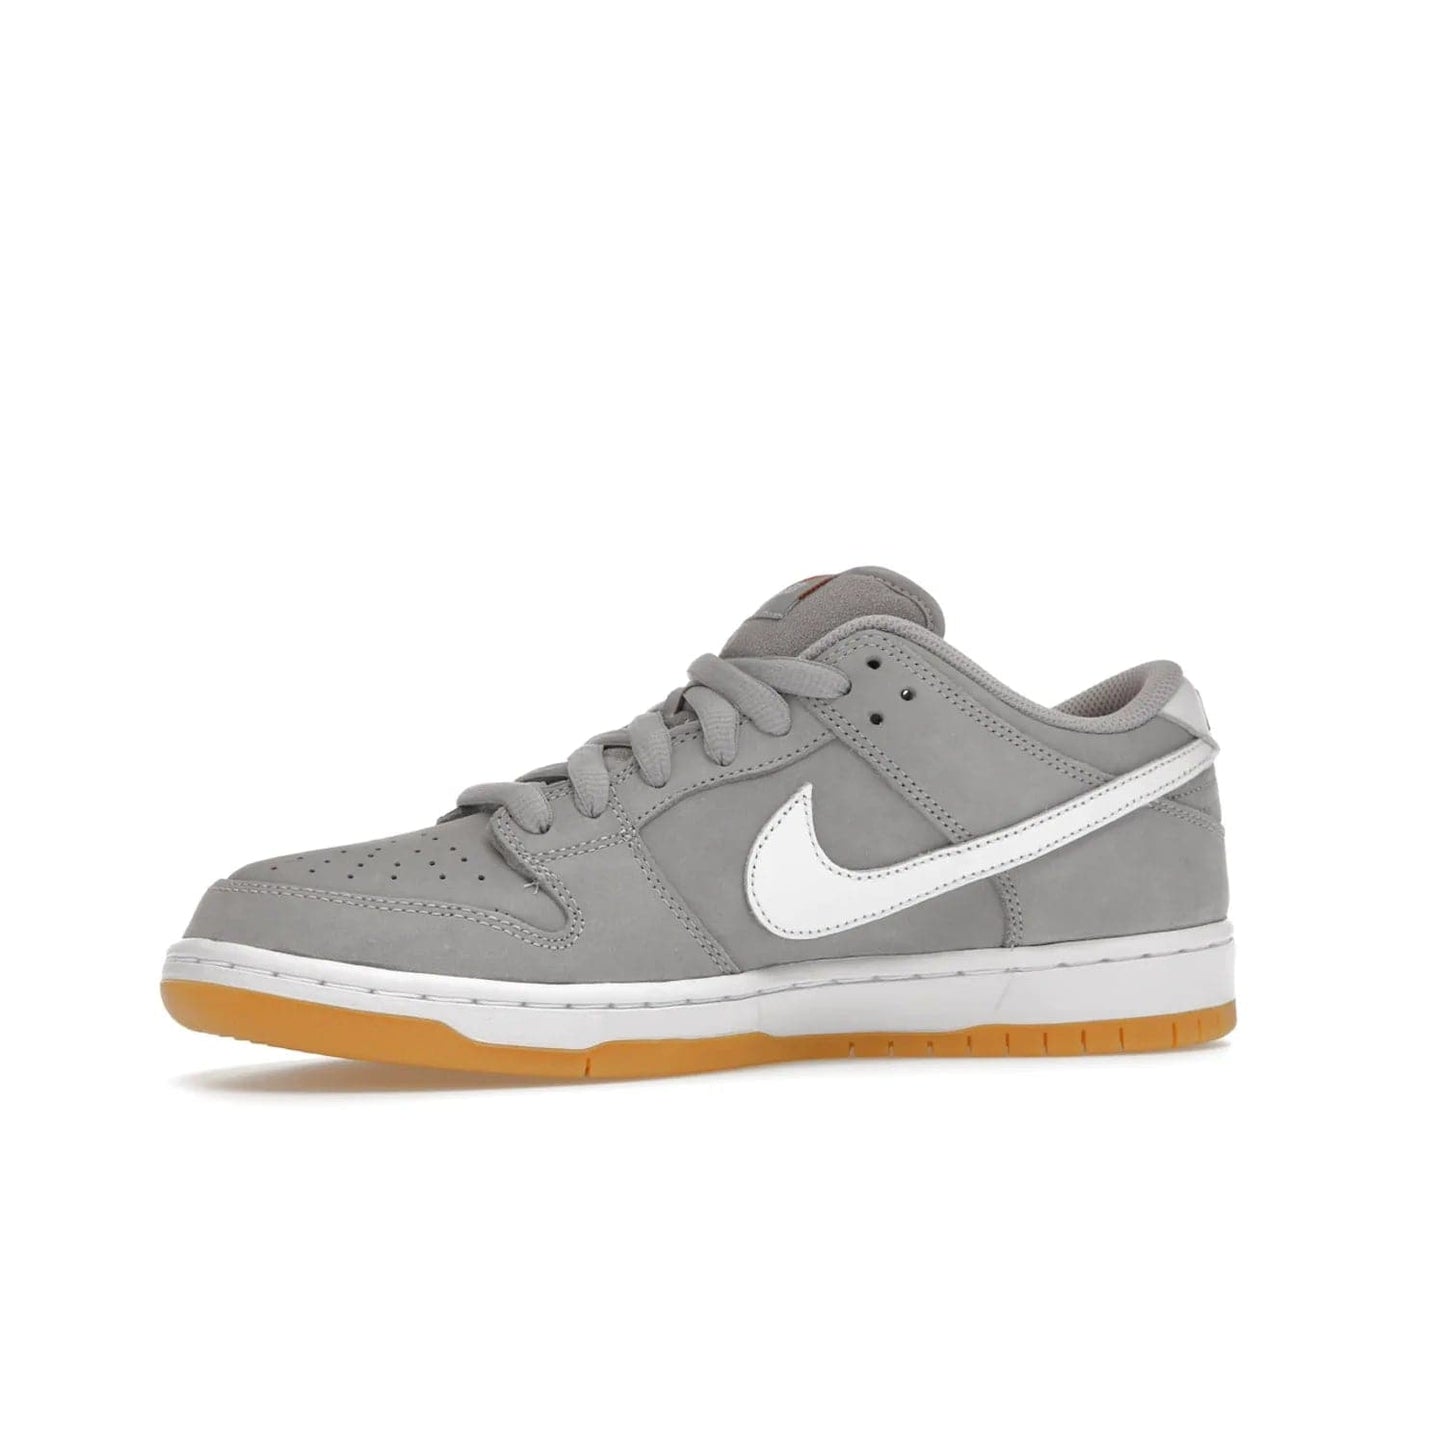 Nike SB Dunk Low Pro ISO Orange Label Wolf Grey Gum - Image 17 - Only at www.BallersClubKickz.com - Introducing Nike's SB Dunk Low Pro ISO Orange Label Wolf Grey Gum - a stylish shoe with a premium Wolf Grey upper, white leather Nike Swoosh, and an eye-catching gum outsole. With special Nike branding and packaging, this shoe adds a unique fashion statement. Out Feb. 24, 2023.